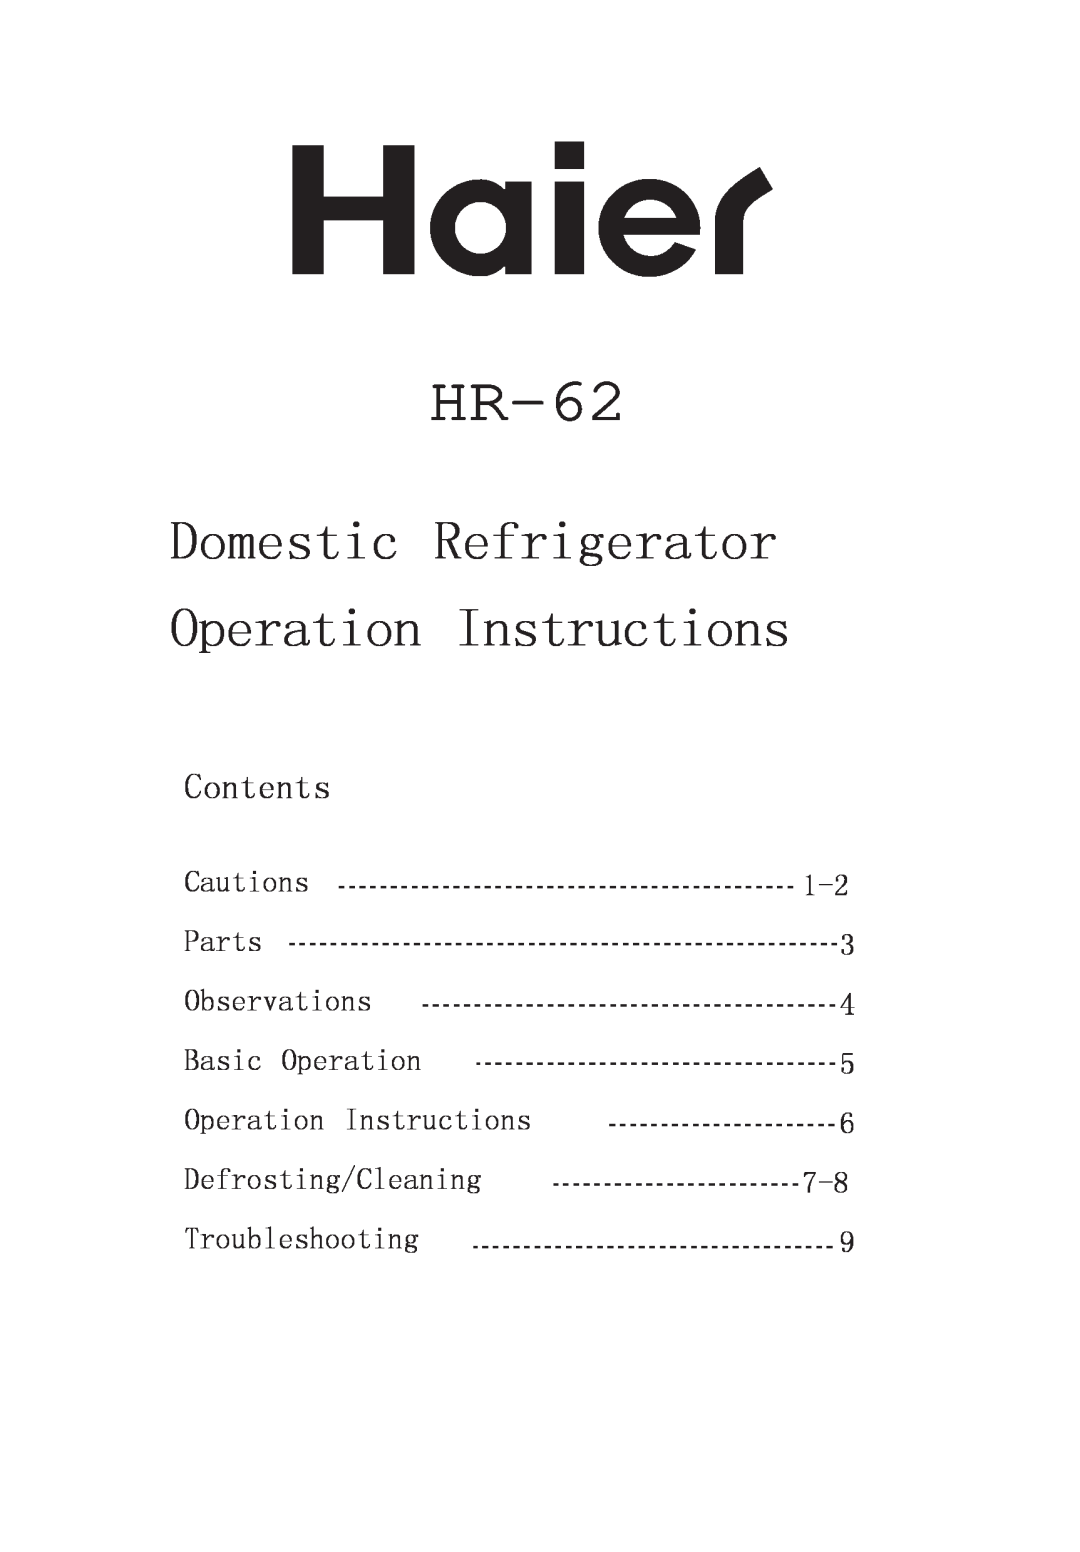 Haier HR-62 manual Domestic Refrigerator Operation Instructions, Contents, Defrosting/Cleaning Troubleshooting 